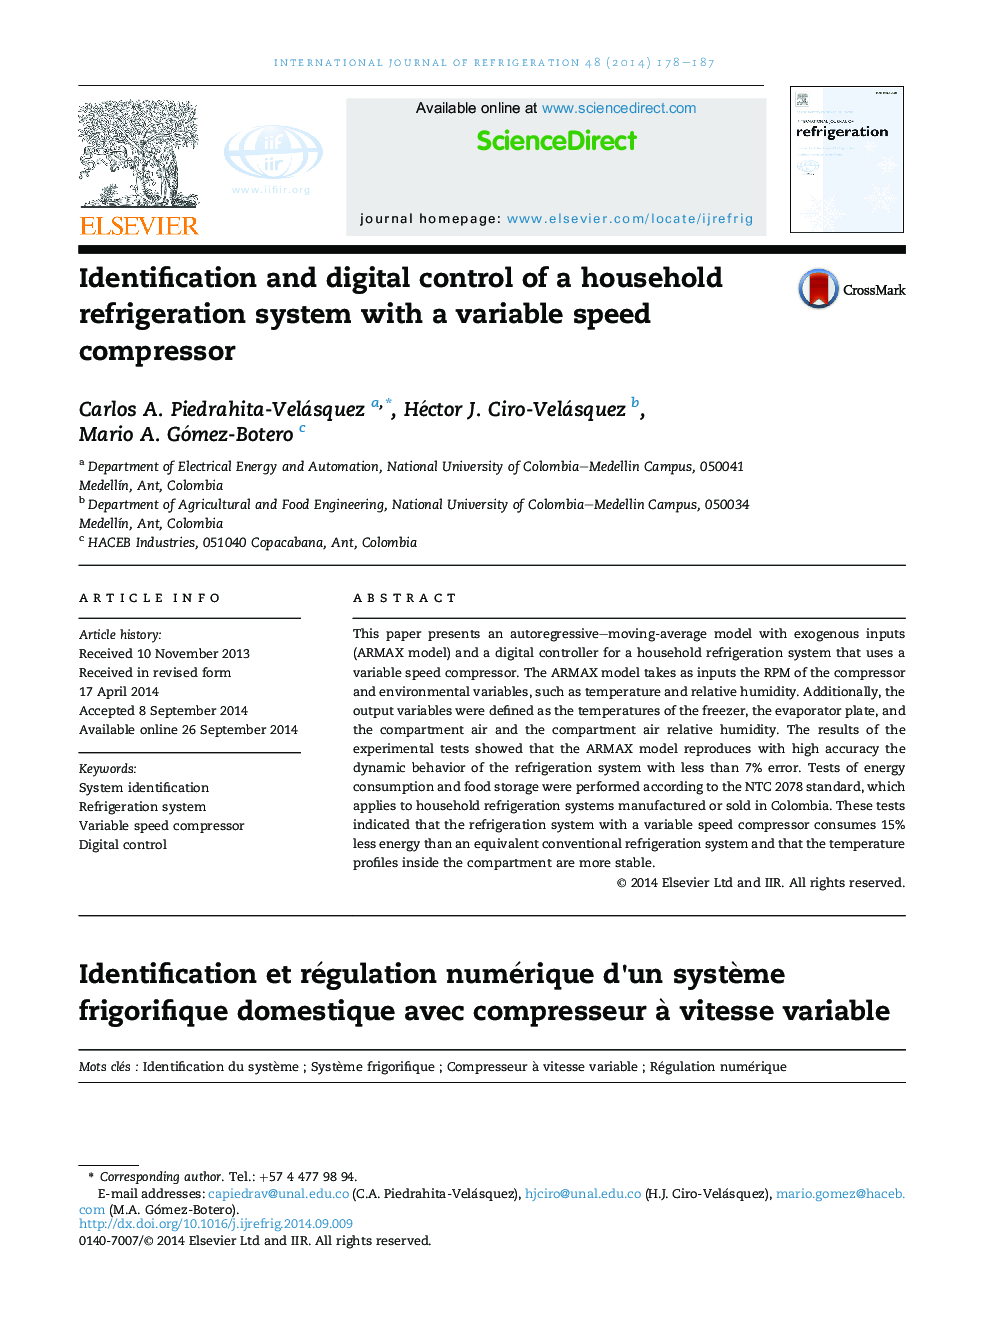 Identification and digital control of a household refrigeration system with a variable speed compressor